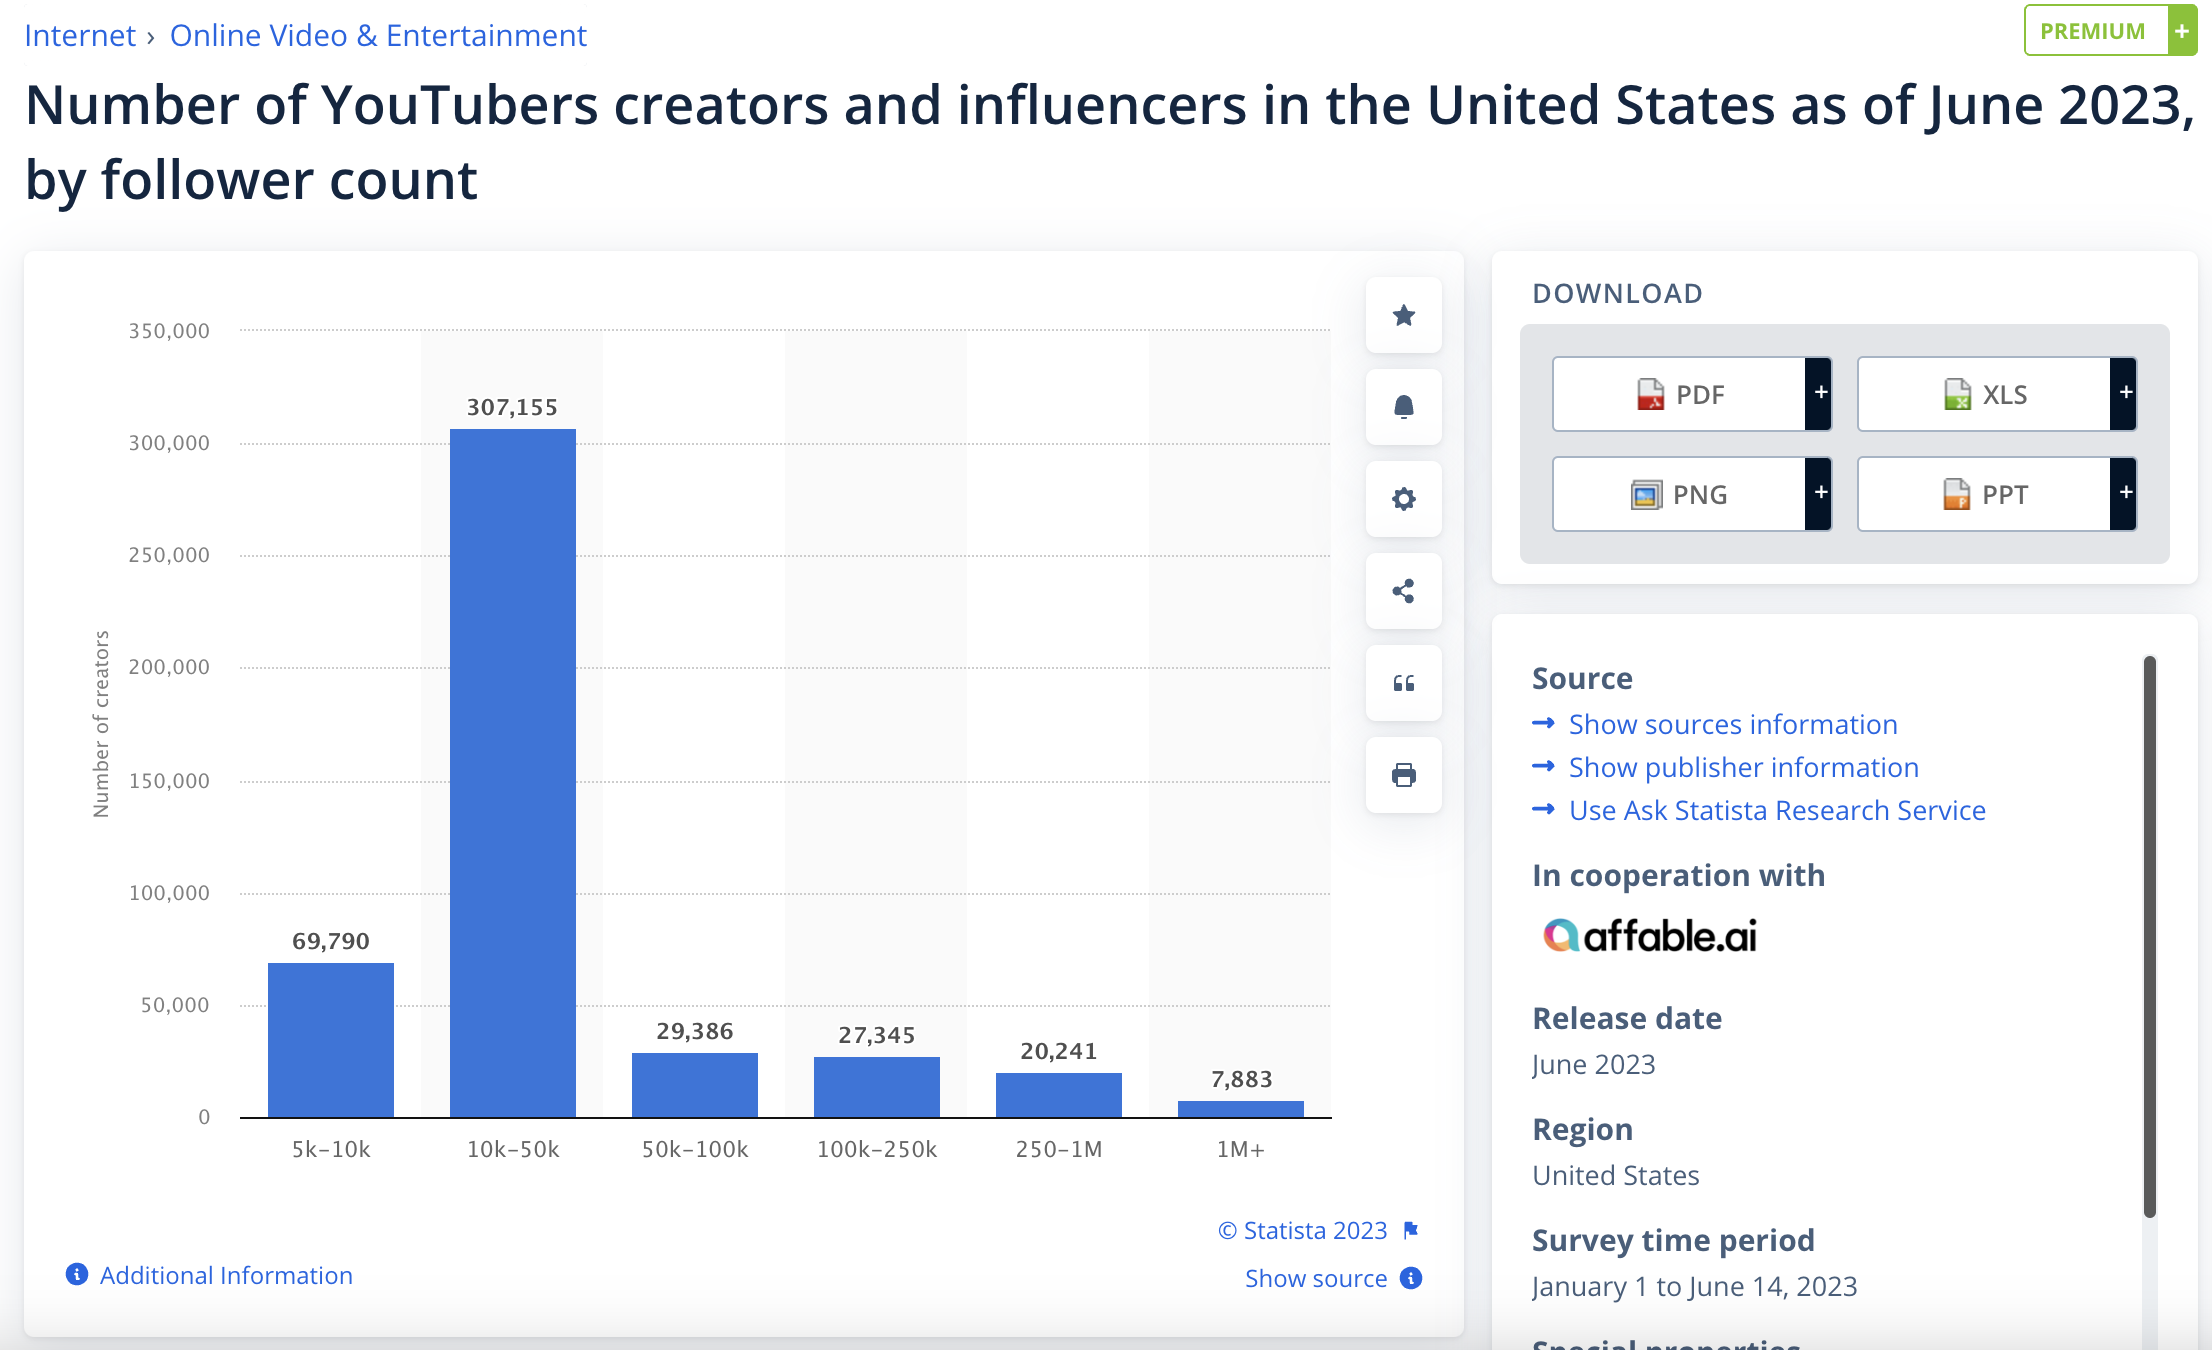 Screenshot from Statista showing the number of YouTube creators and influencers in the United States as of June 2023 by follower count